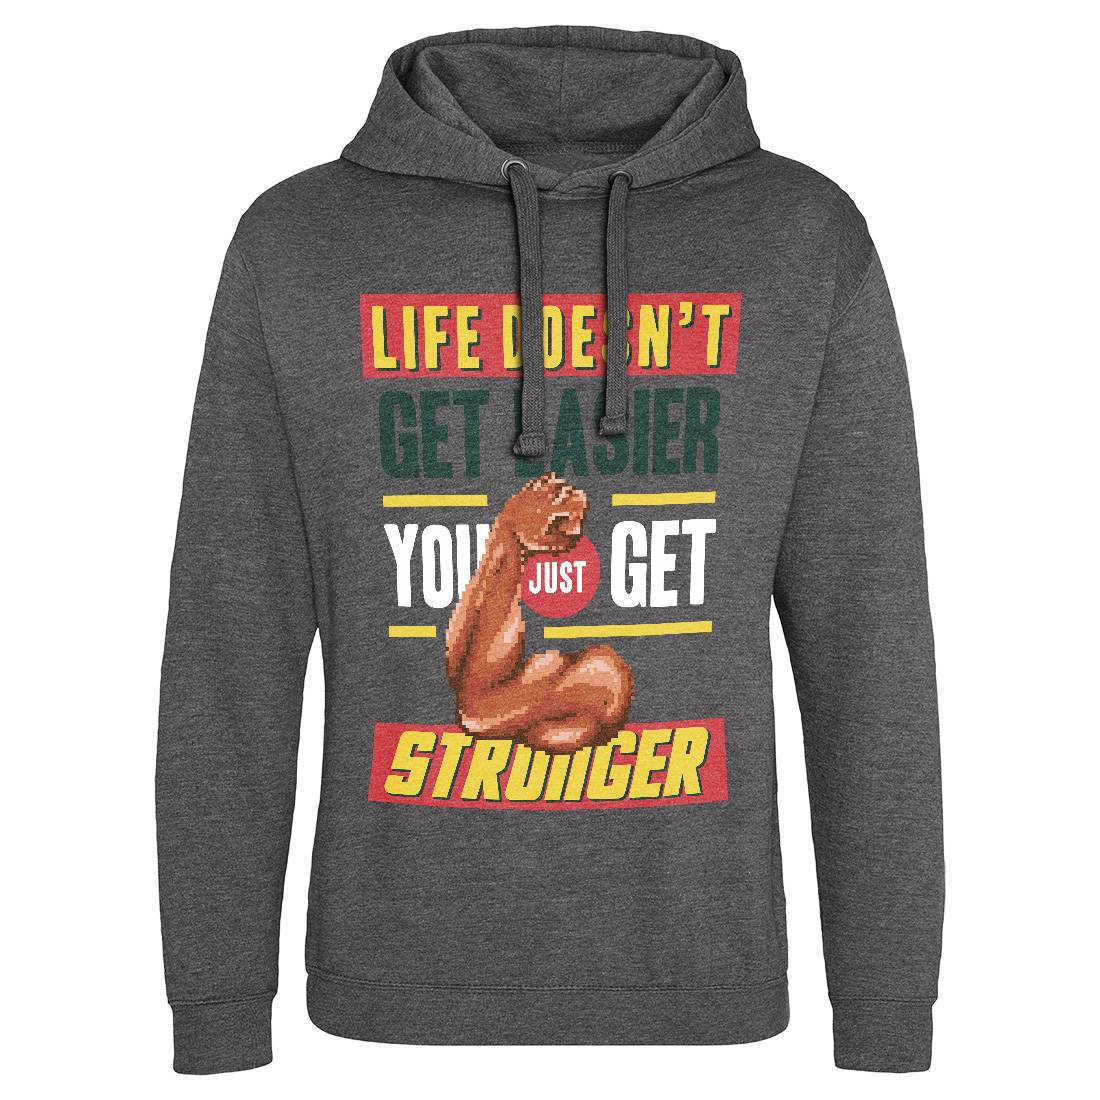 Get Stronger Mens Hoodie Without Pocket Gym B904